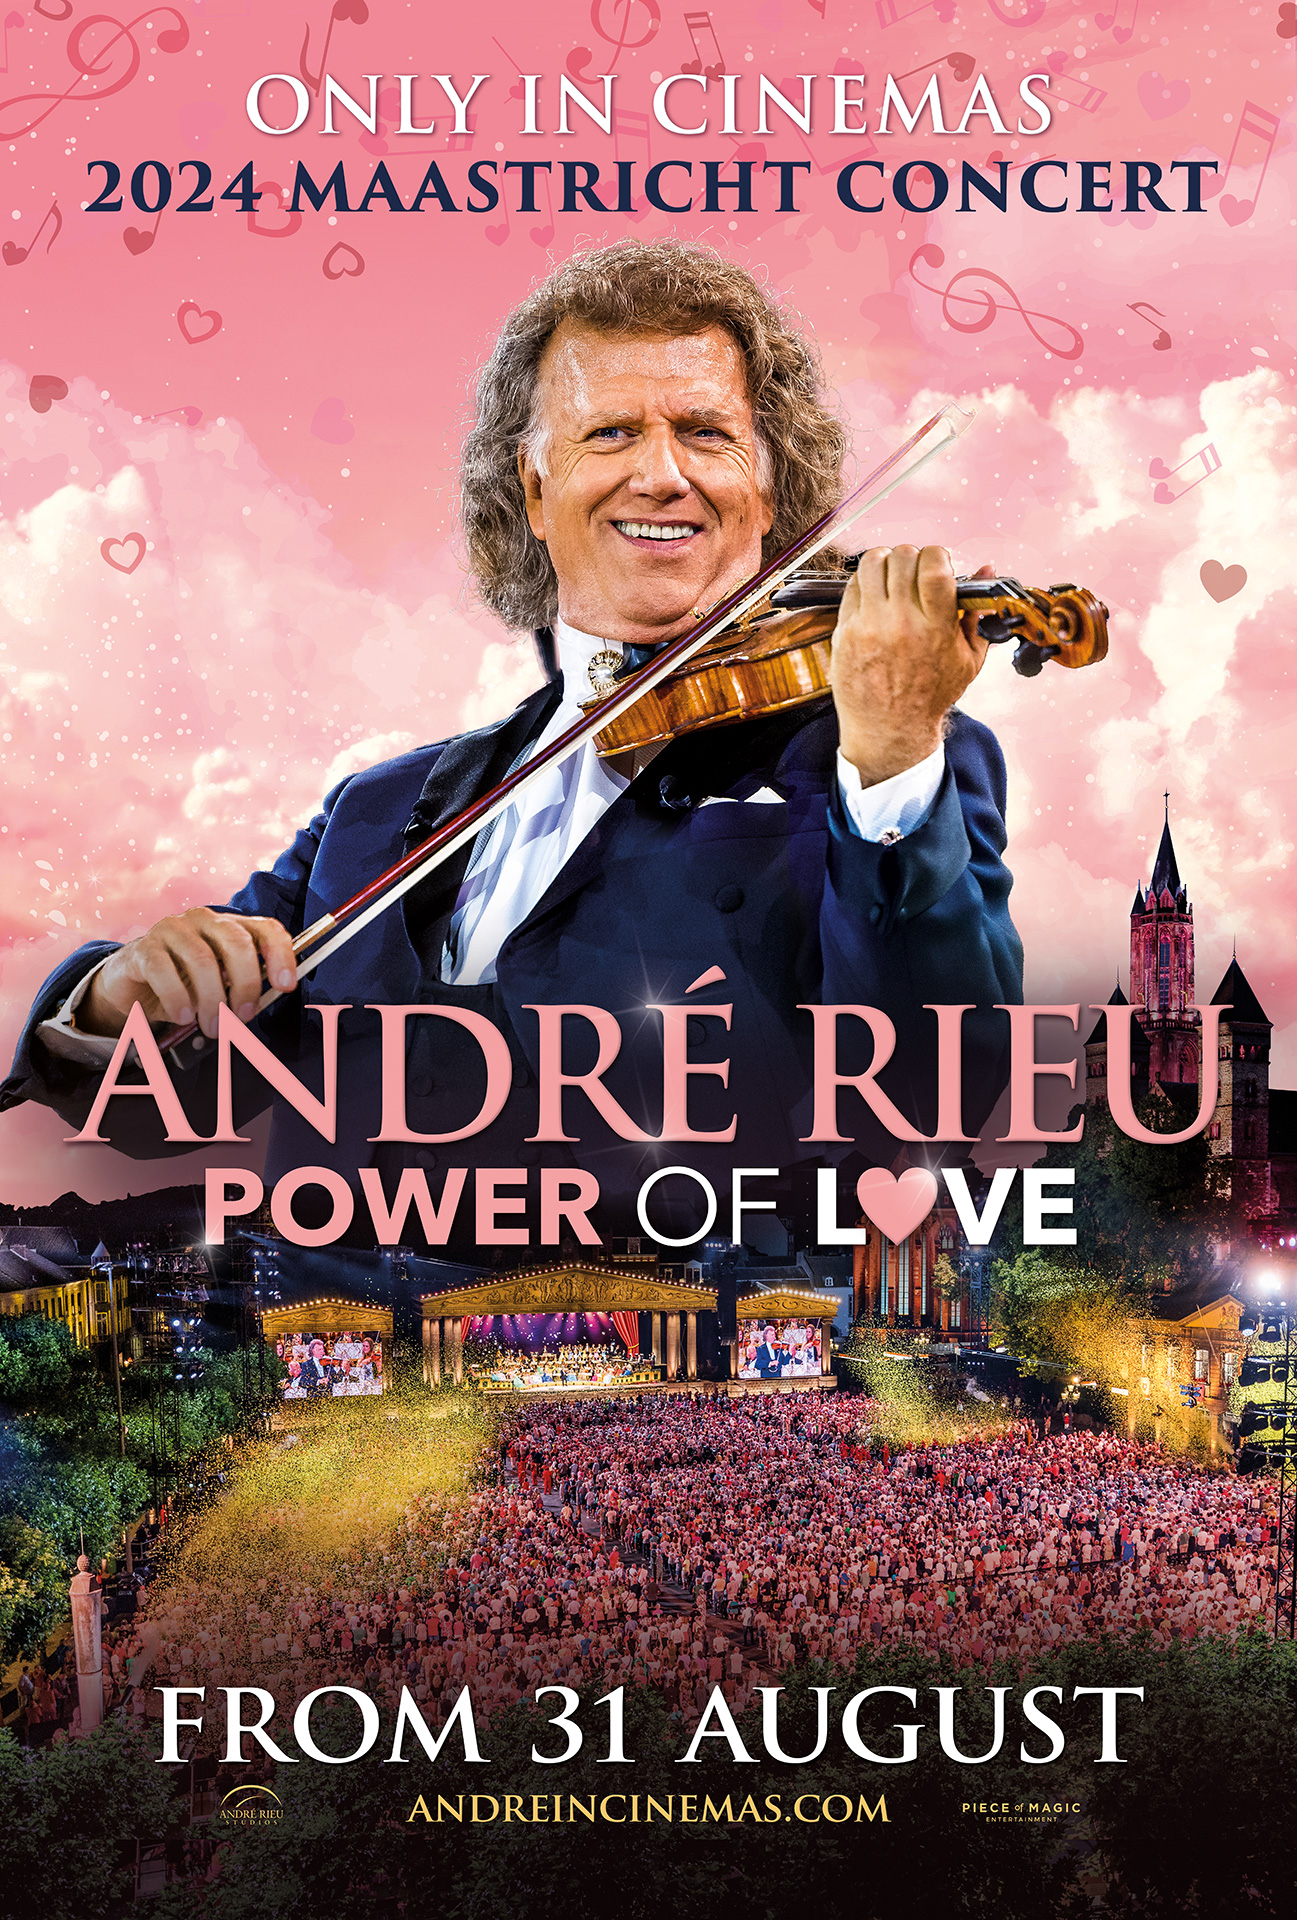 ANDRE RIEU: LOVE IS IN THE AIR